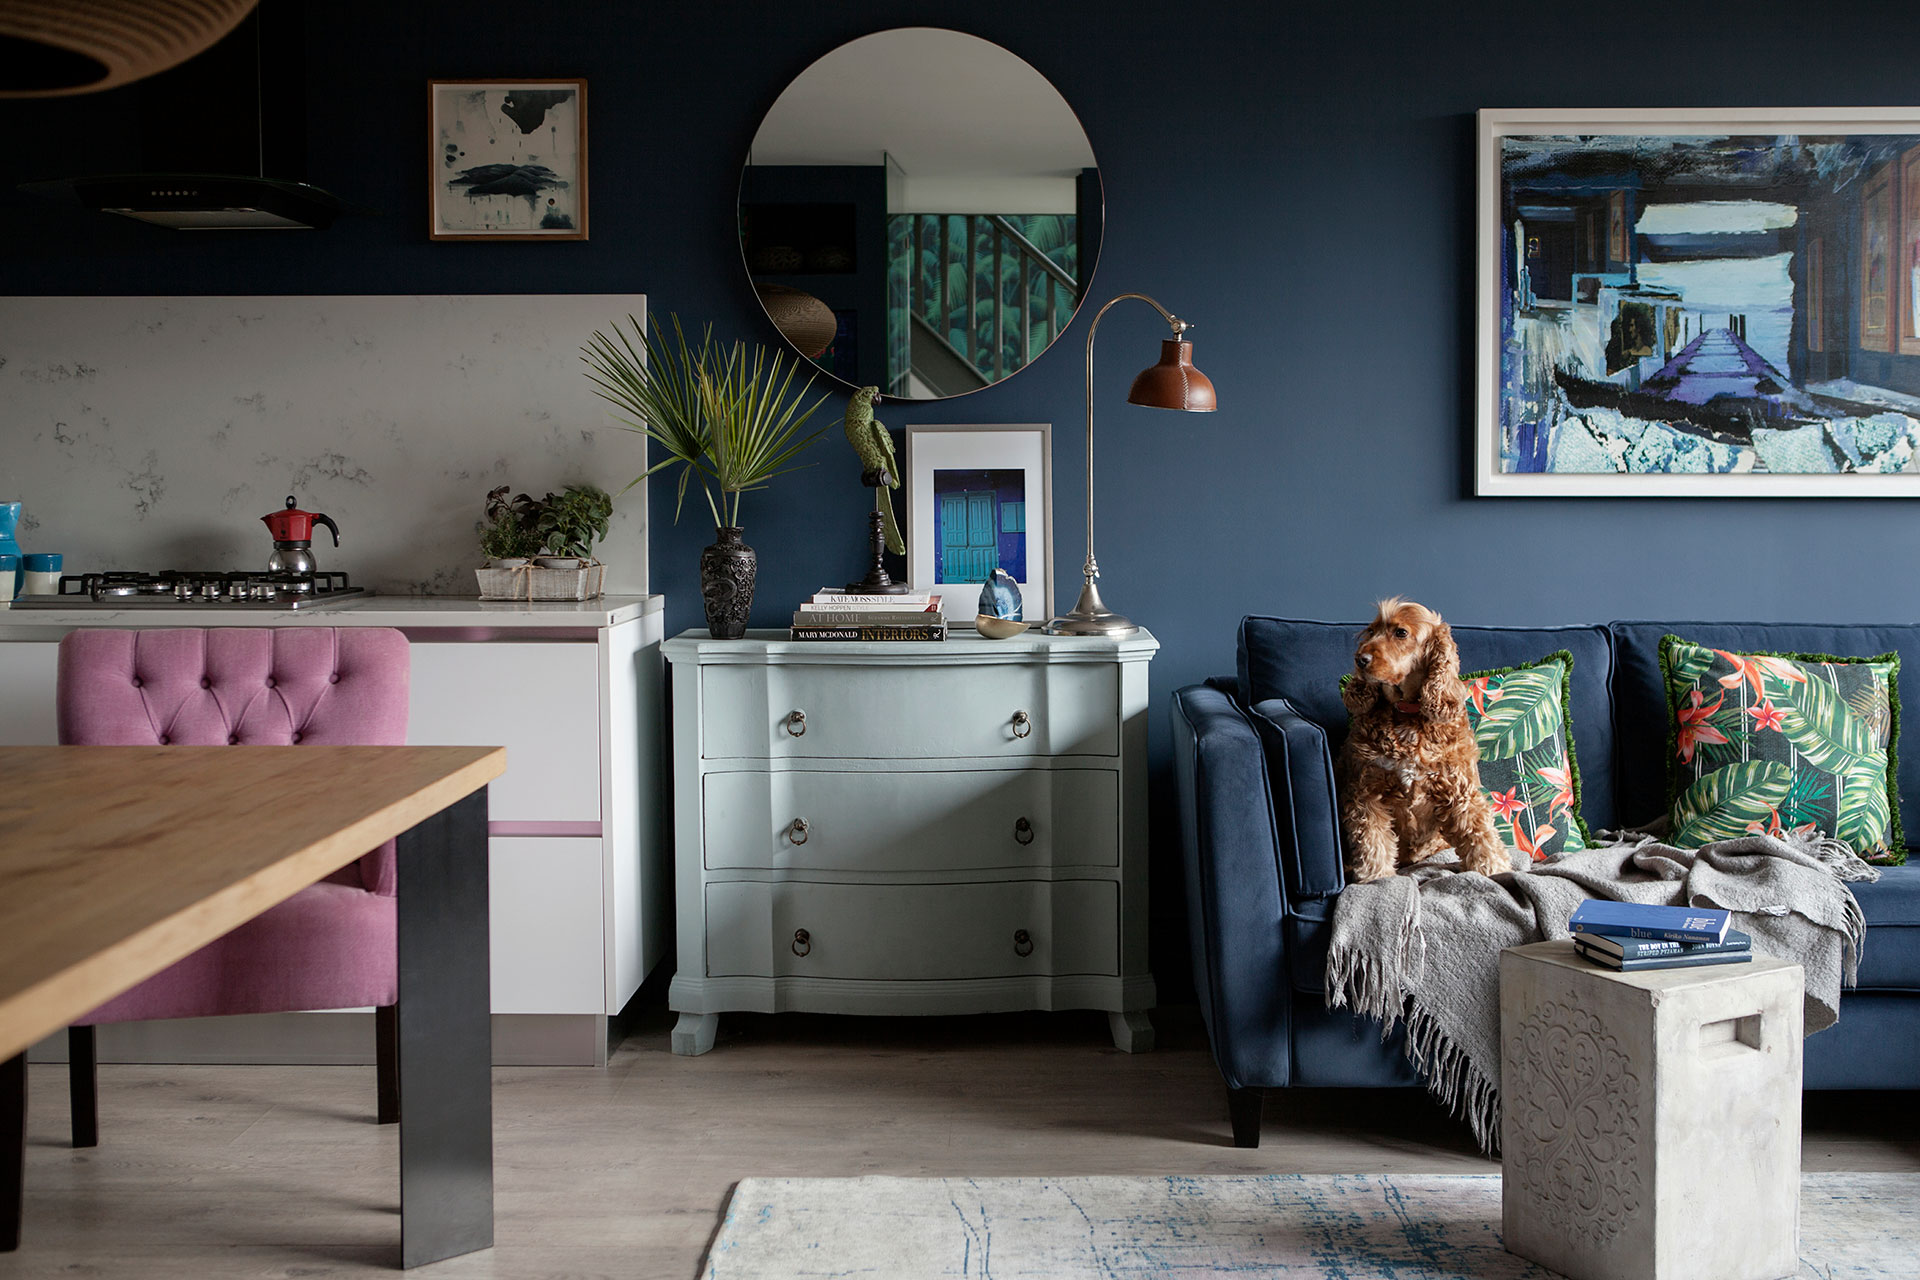 Interiors By Caroline Brand Photography for Website - Clontarf interior image by Ruth Maria Murphy